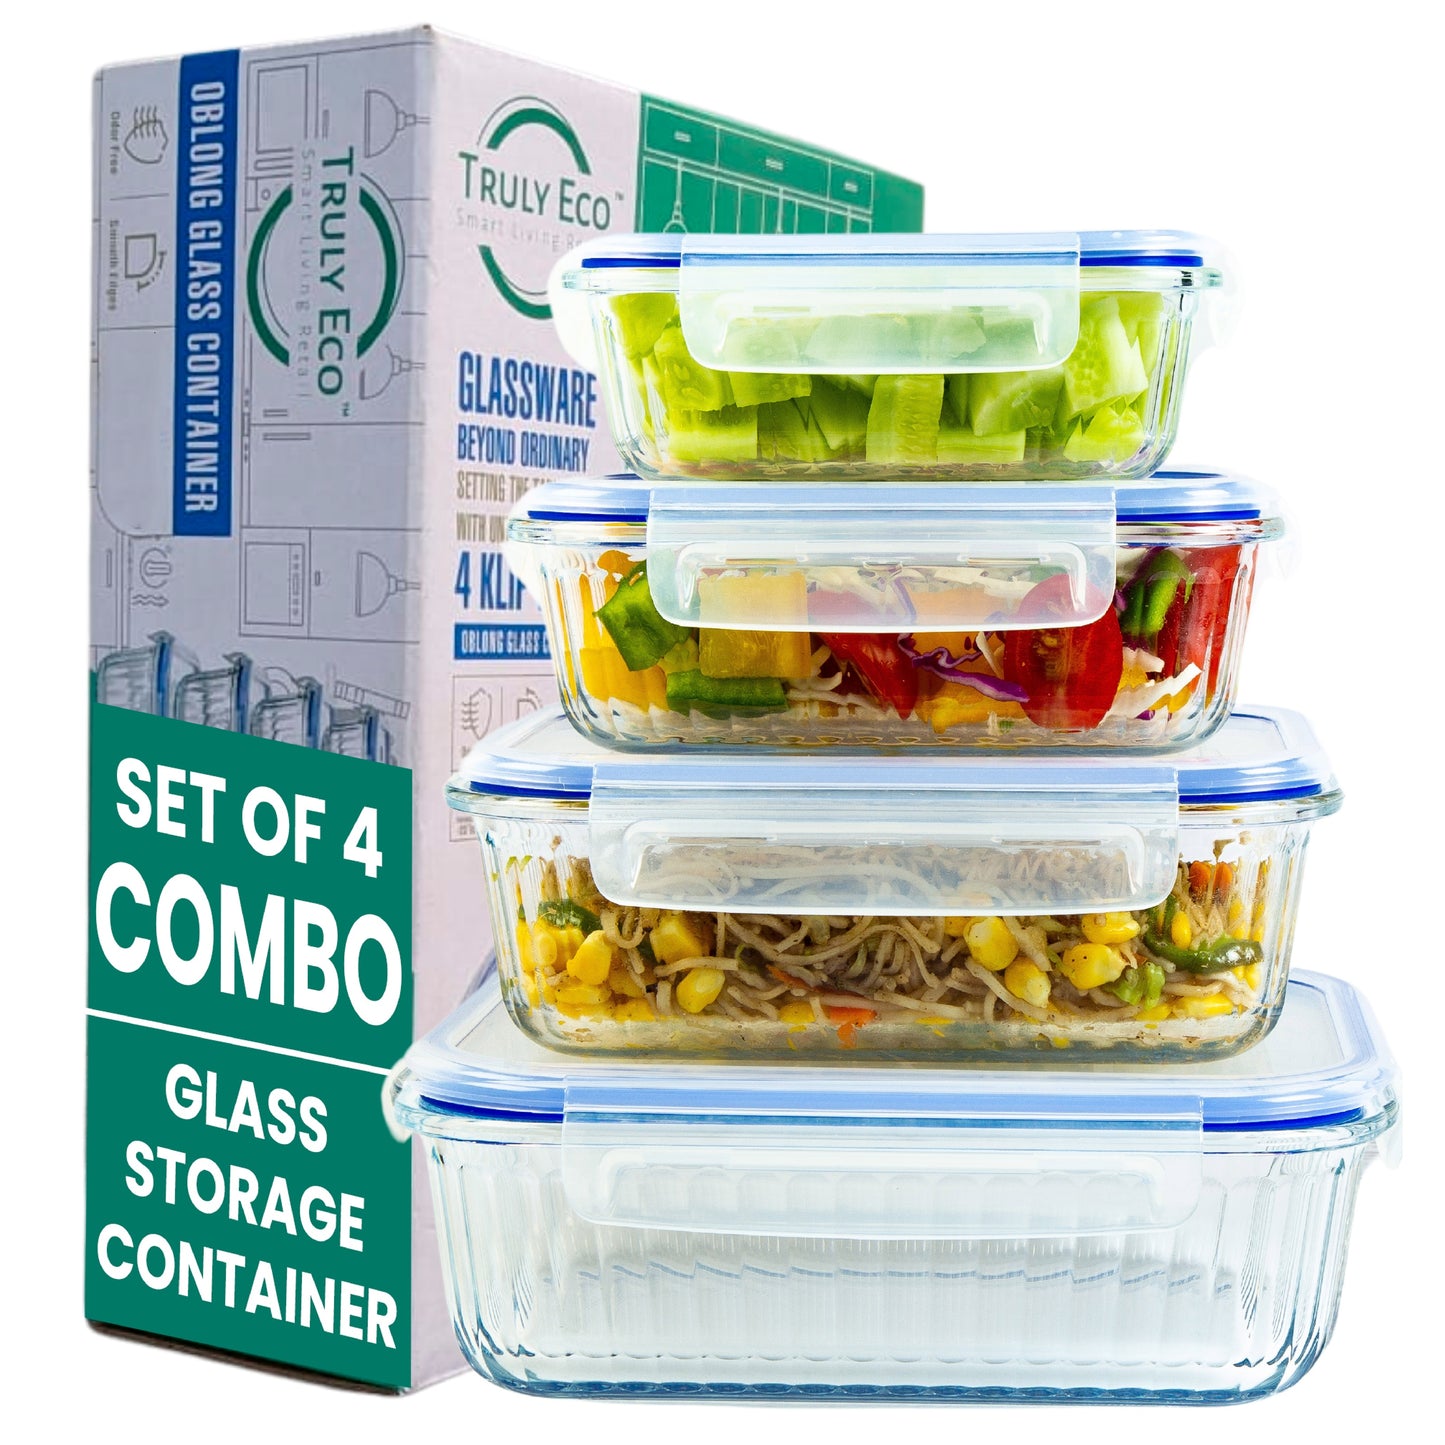 Truly Eco Oblong Borosilicate Glass Containers Combo Set - 370ml, 640ml, 1050ml and 1520ml